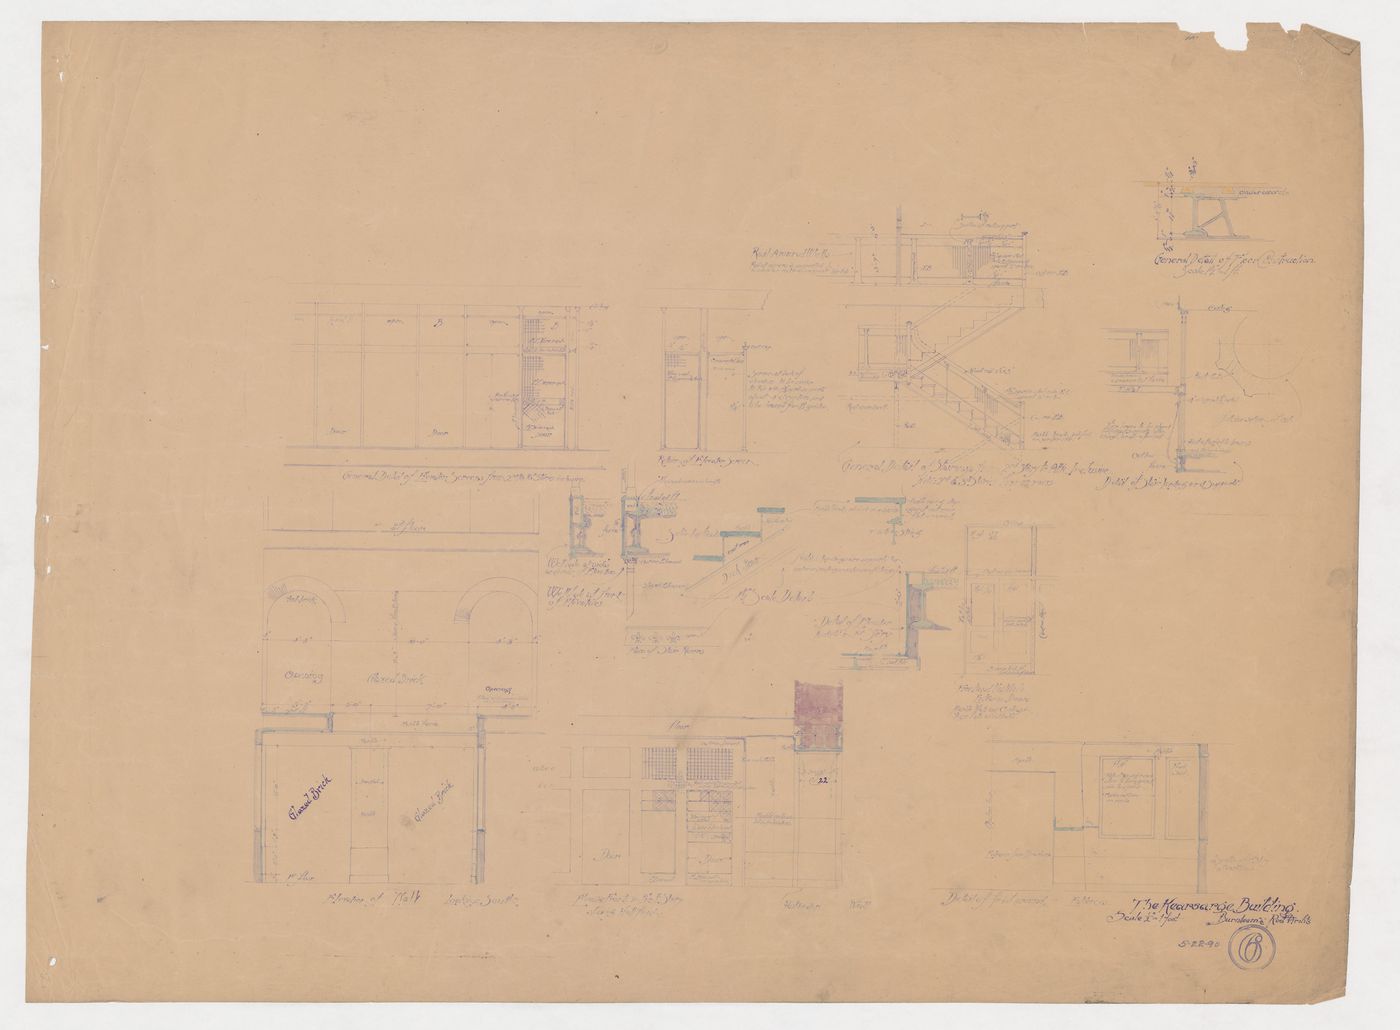 Kearsarge Building, Chicago: Partial elevations and sectional and plan details for the entrances, doors, stairs, elevator enclosures and interior walls